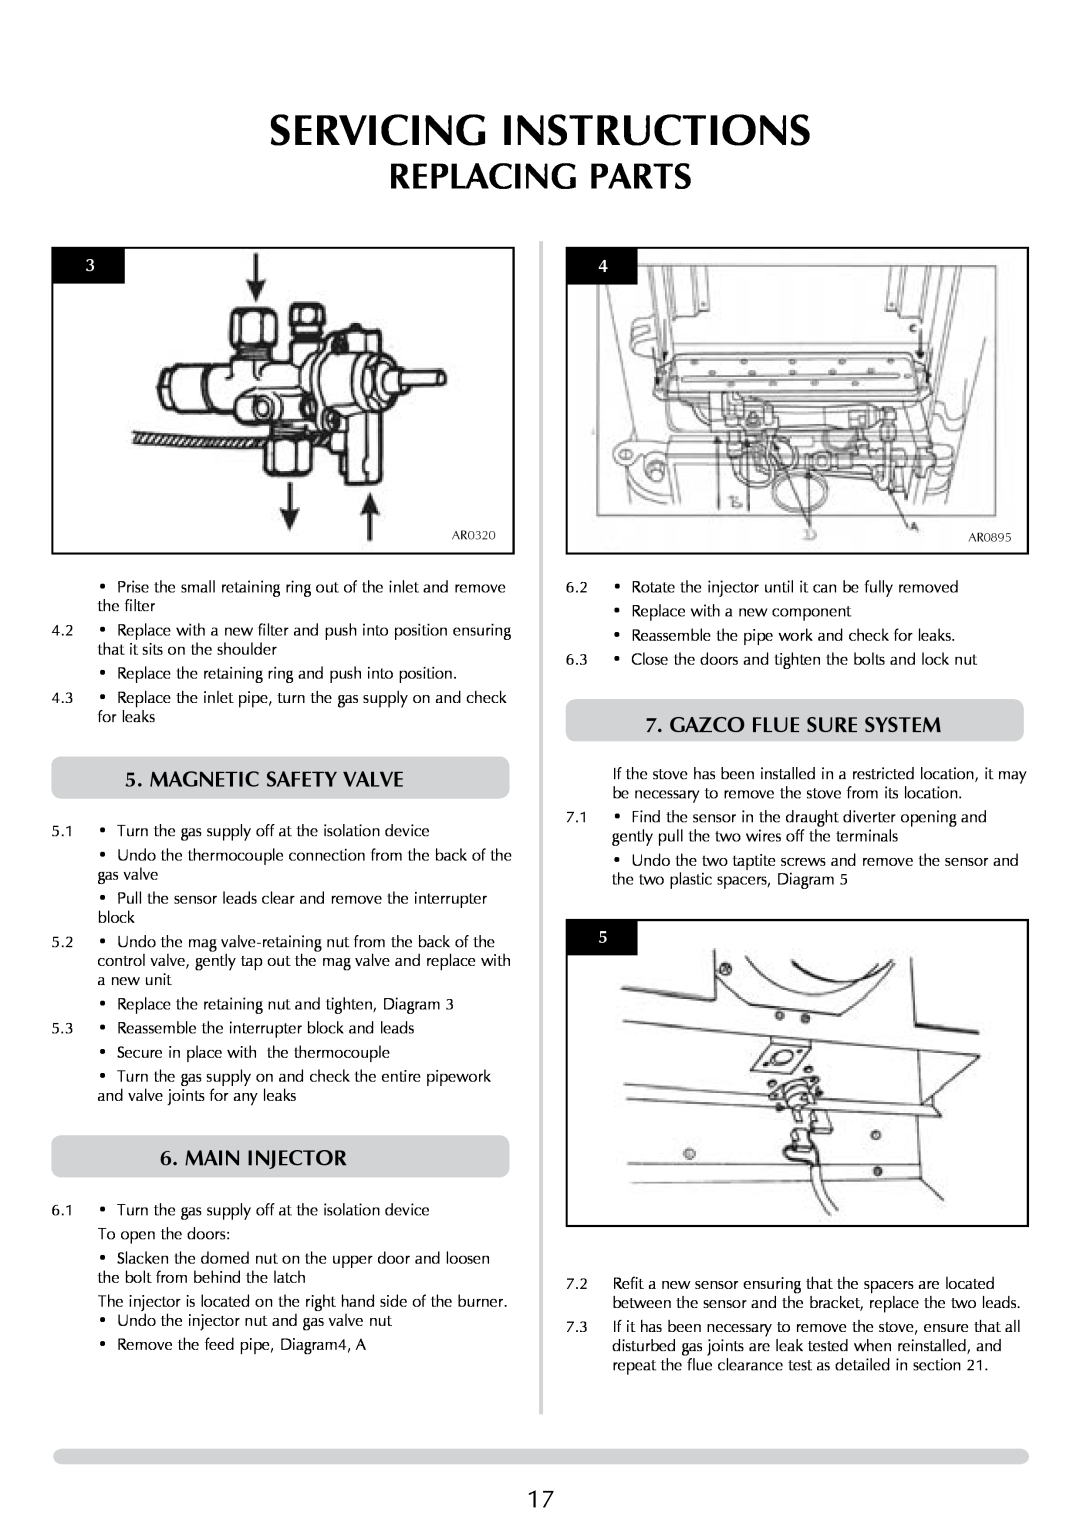 Stovax P8050 Servicing Instructions, Replacing Parts, Magnetic Safety Valve, Main Injector, Gazco Flue Sure System 